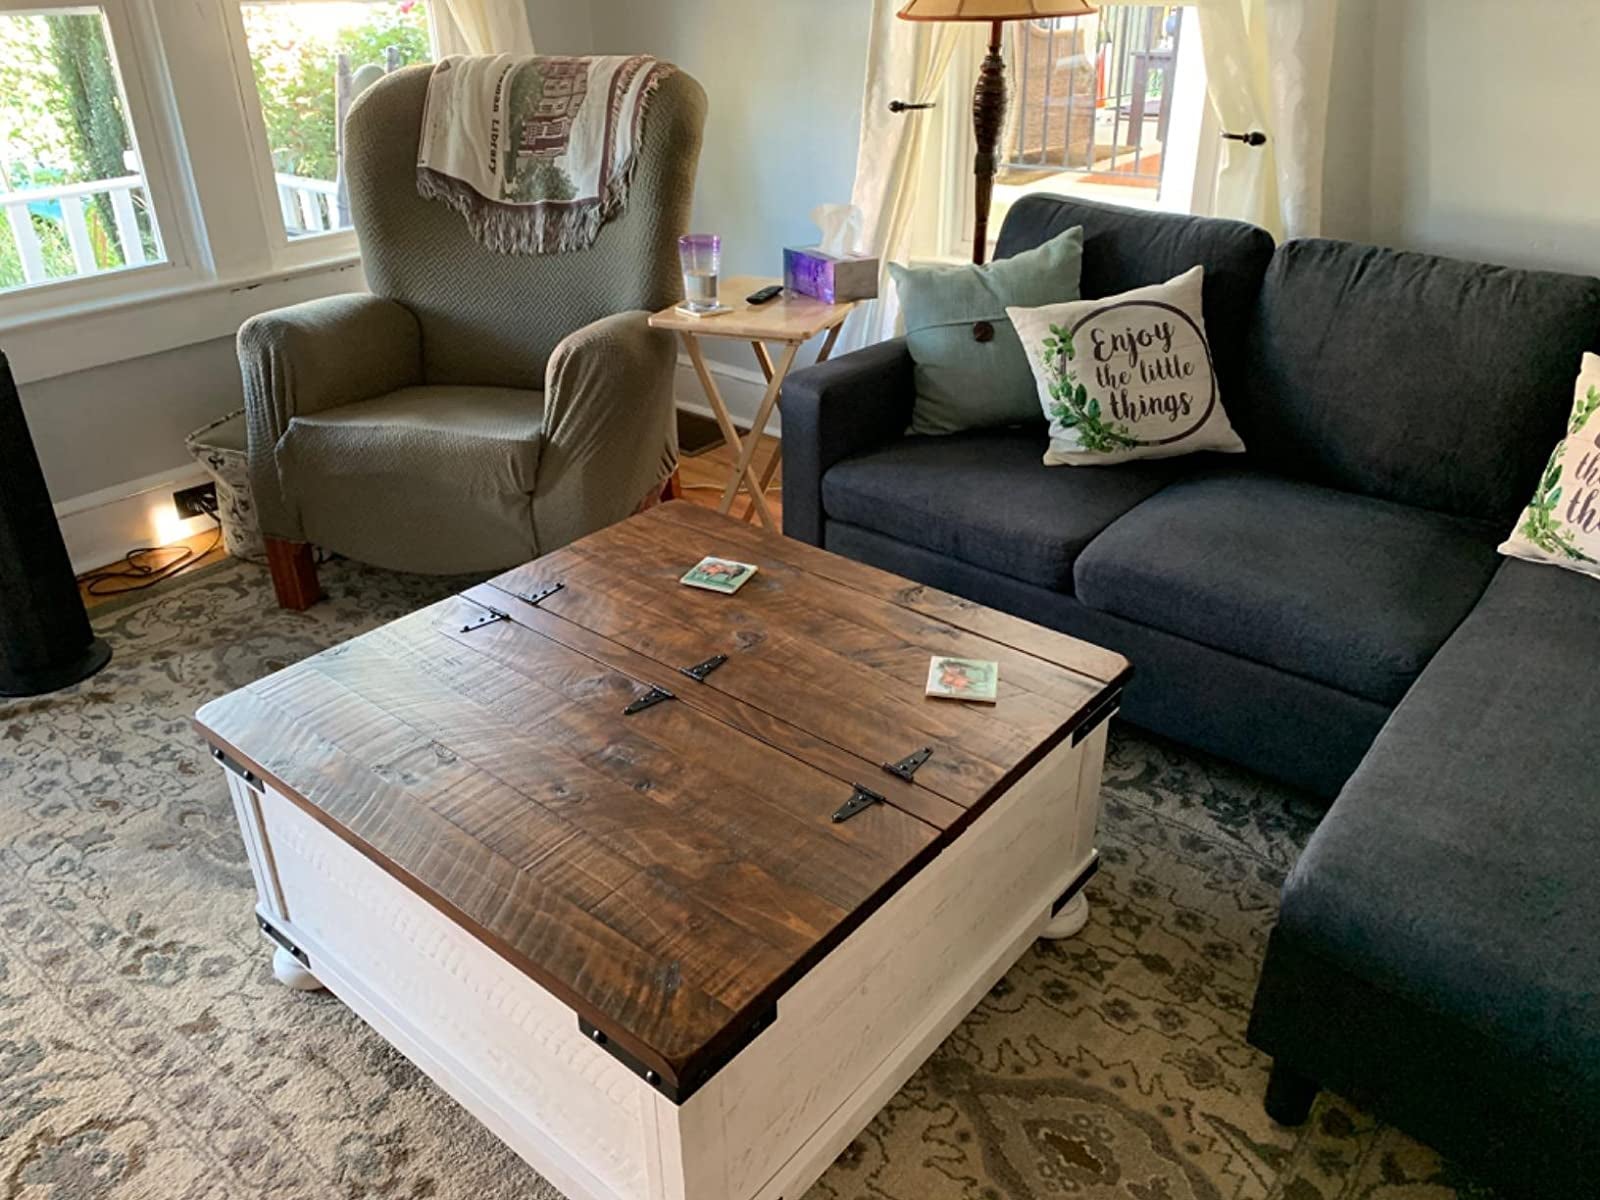 18 Stunning Coffee Tables With Built-in Storage - Living in a shoebox